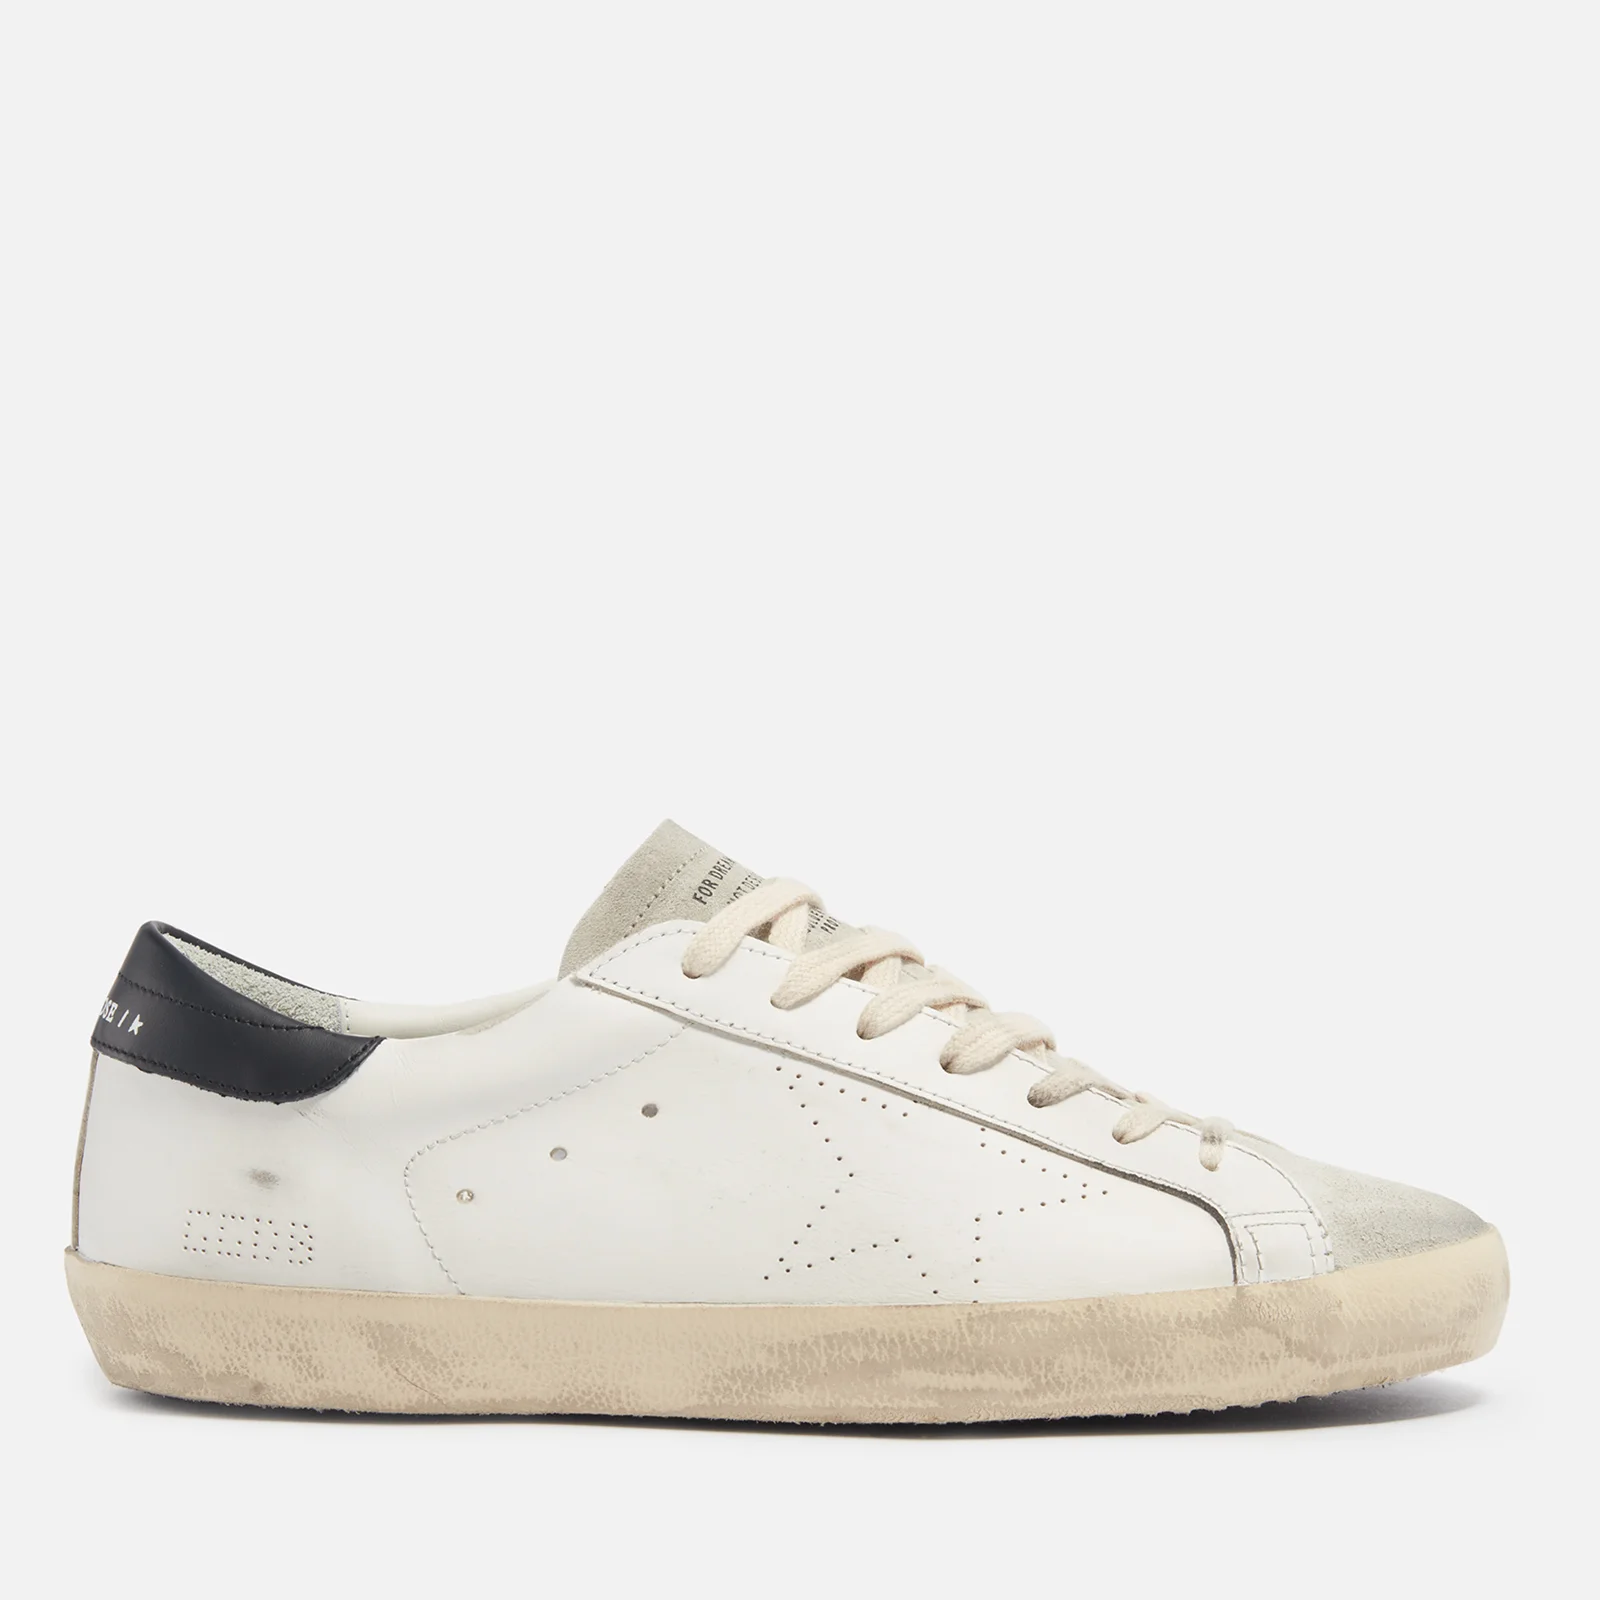 Golden Goose Men's Superstar Leather and Suede Trainers Image 1